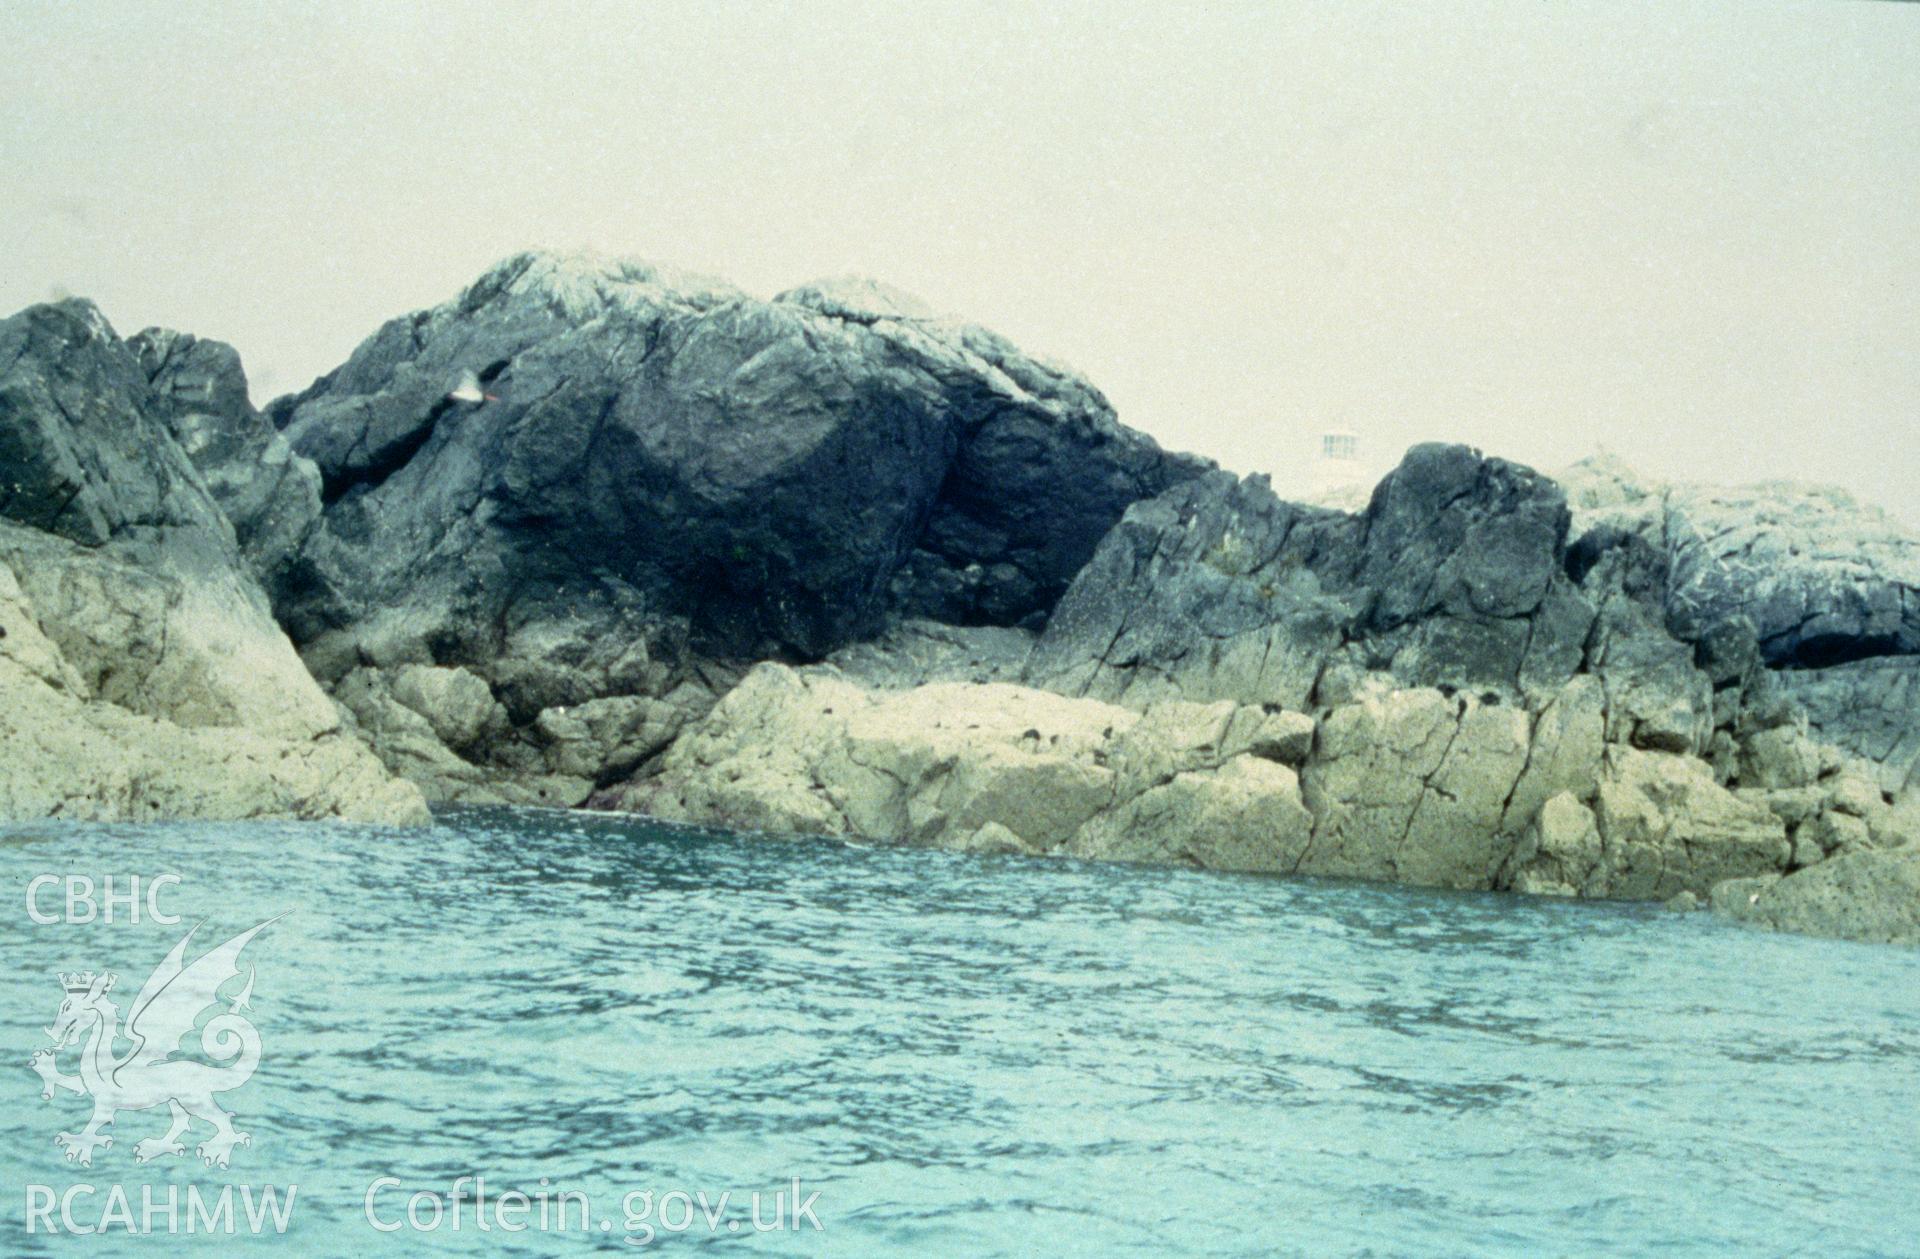 Colour slide of of the Skerries in the vicinity of the wreck site, from a survey of the Mary designated shipwreck, courtesy of National Museums, Liverpool (Merseyside Maritime Museum)